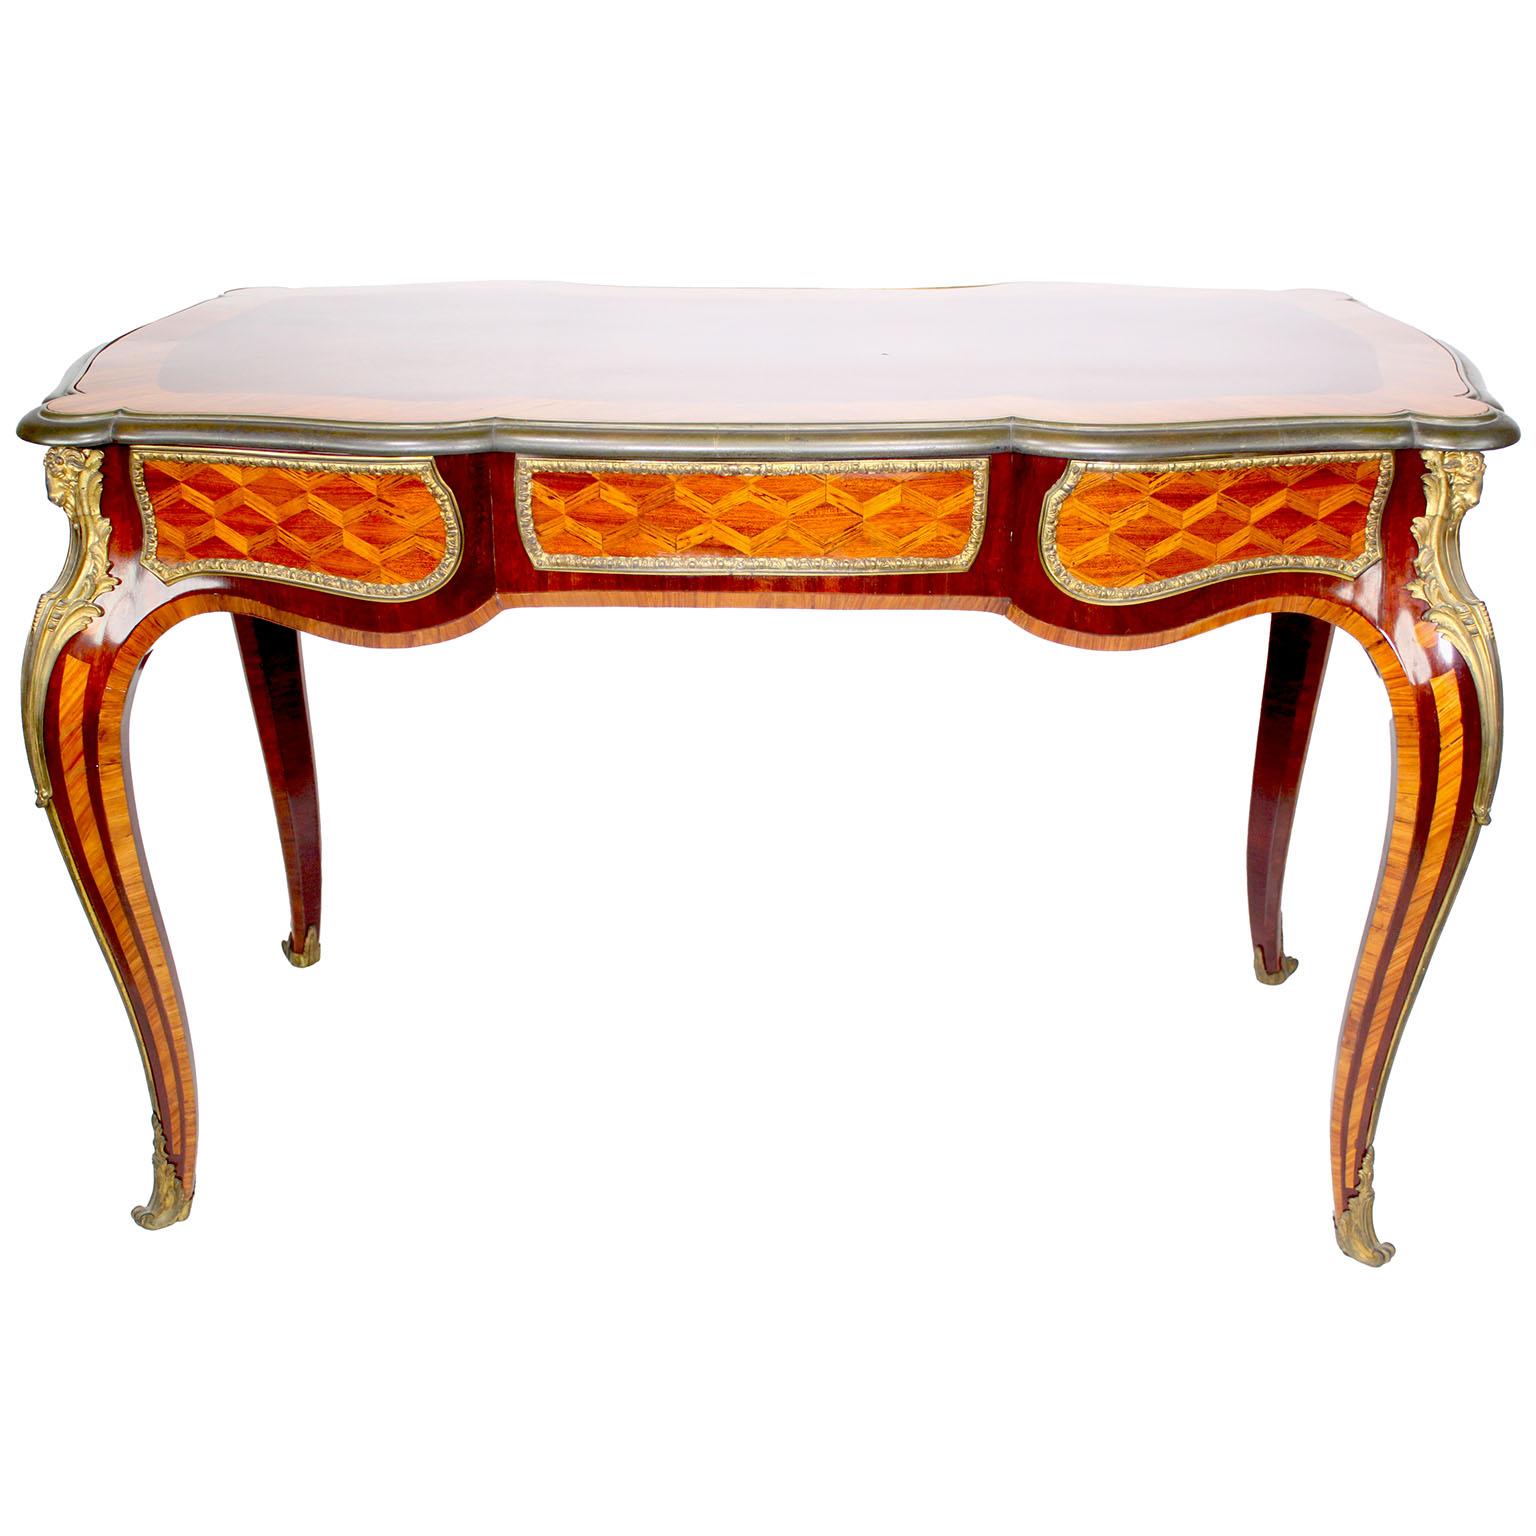 Gilt A French 19th Century Louis XV Style Kingwood Parquetry Ladies Writing Desk  For Sale